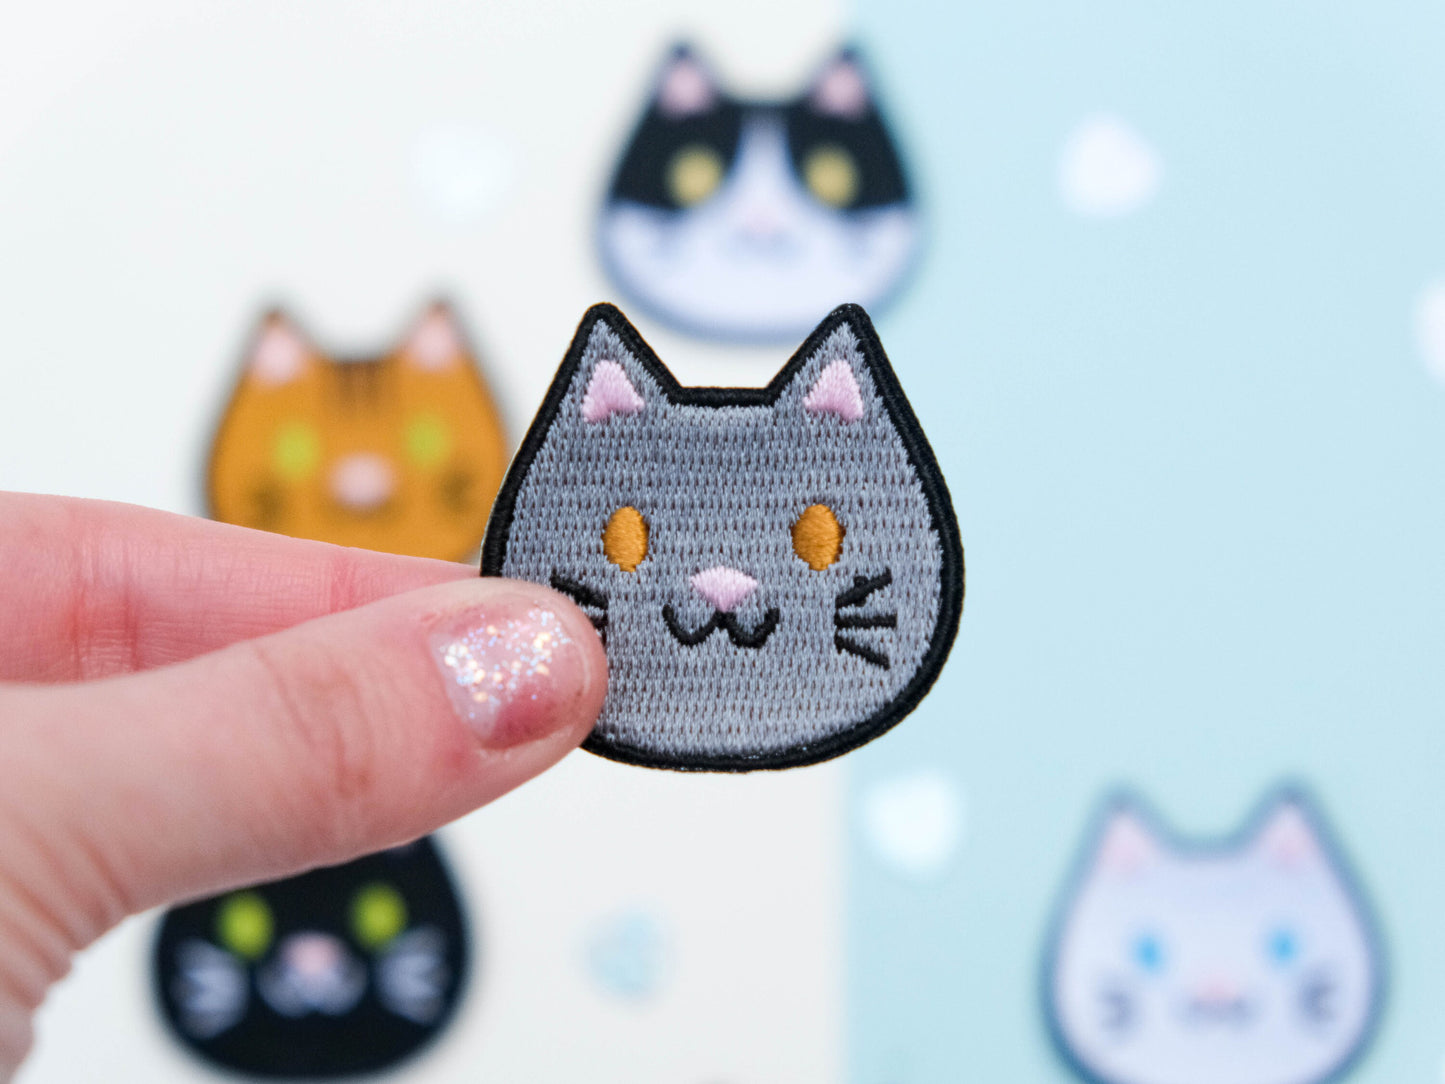 Cat Patch - Embroidery patch - Cute Embroidery Cat Patch - Iron on Patch - Tuxedo cat - Tiger Orange Cat - Grey Cat - Black Cat - White Cat